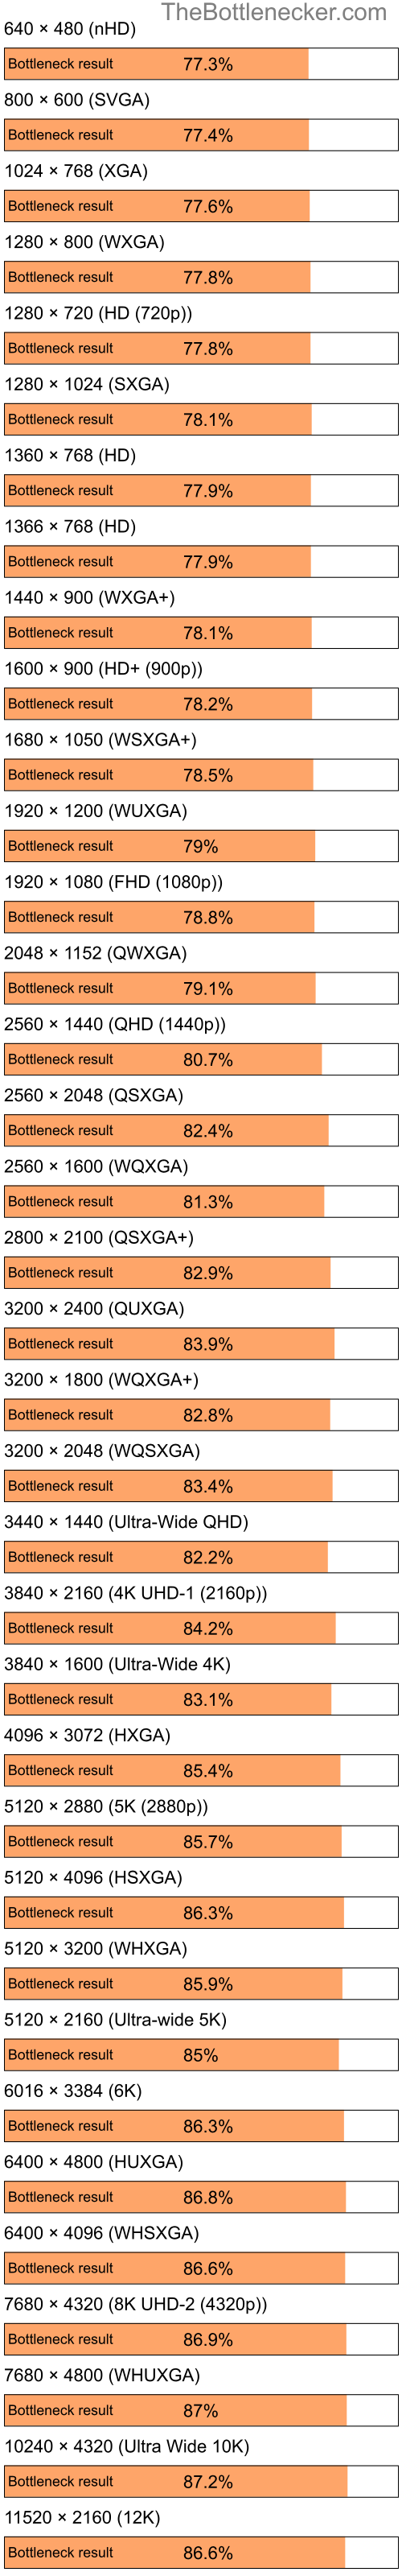 Bottleneck results by resolution for Intel Celeron M 420 and AMD Mobility Radeon 9700 in General Tasks